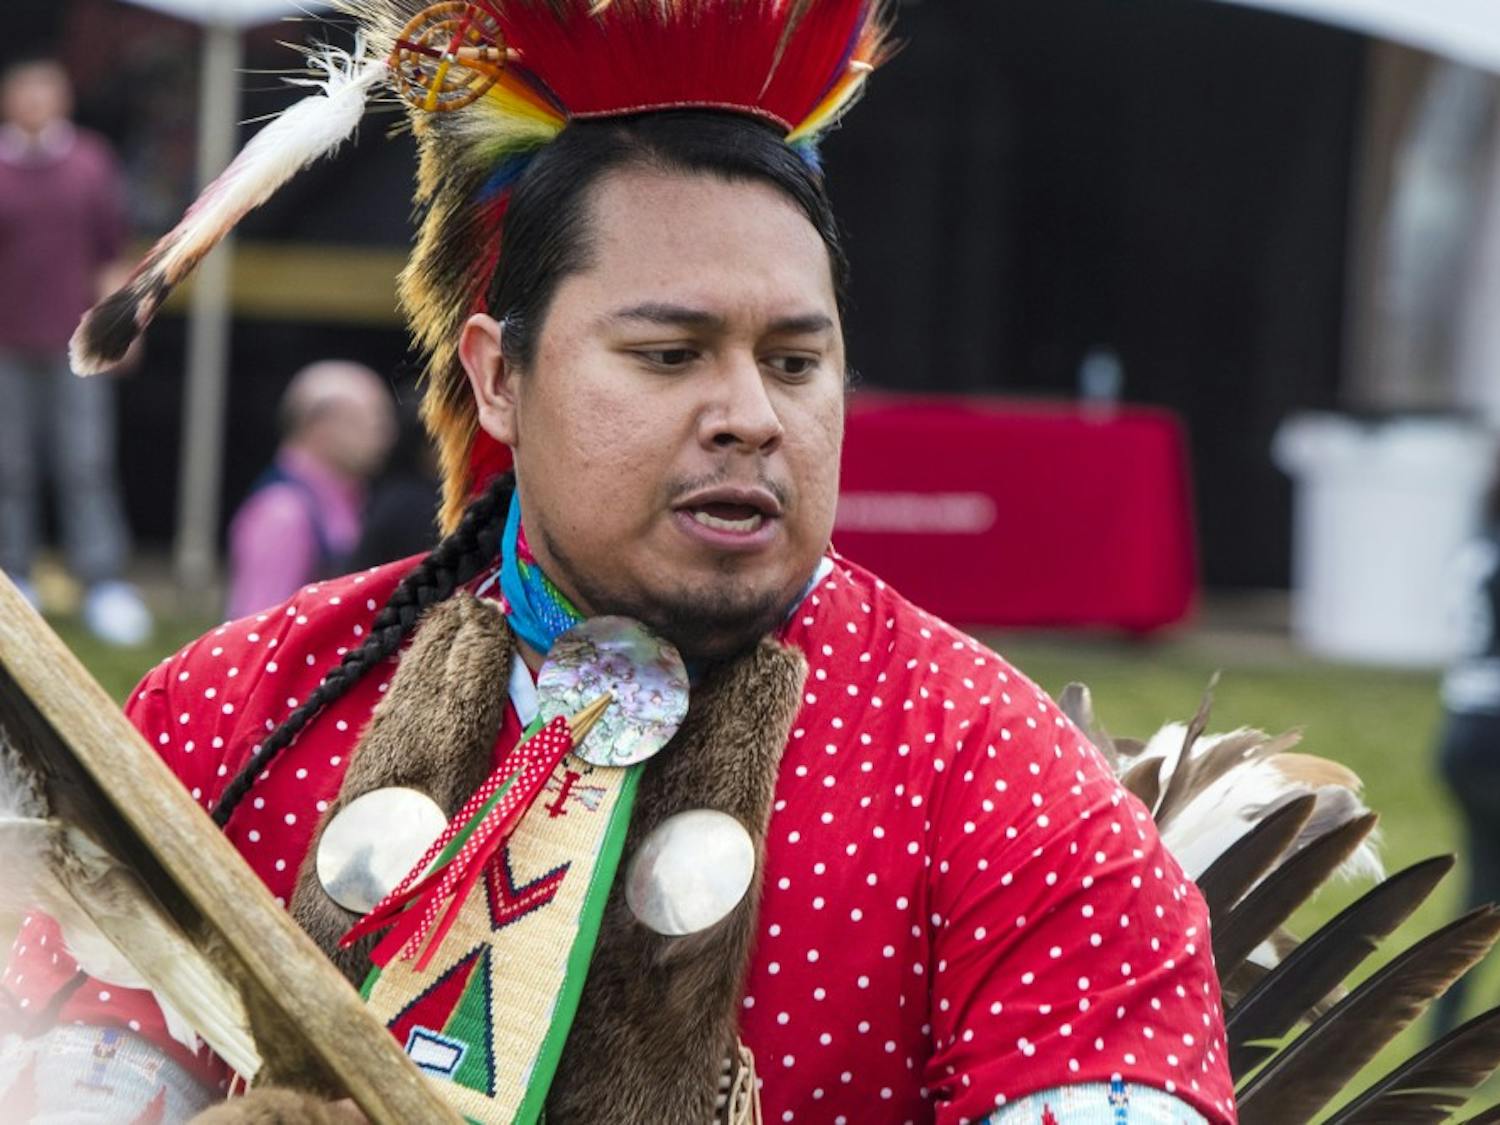 GALLERY: The eighth annual Indiana University Traditional Powwow